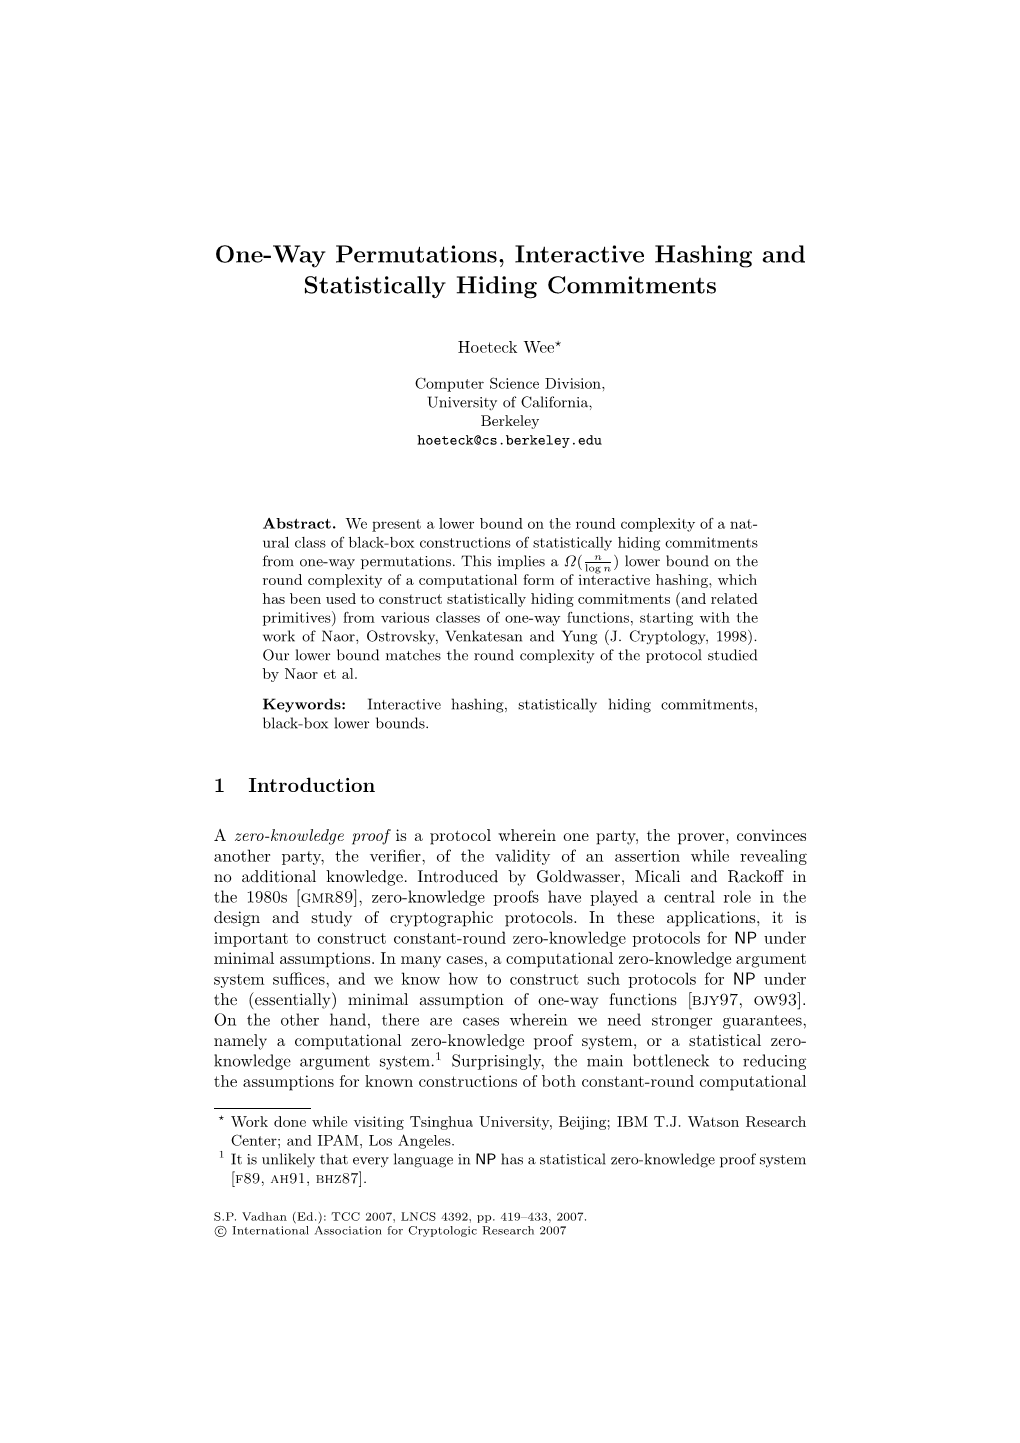 One-Way Permutations, Interactive Hashing and Statistically Hiding Commitments